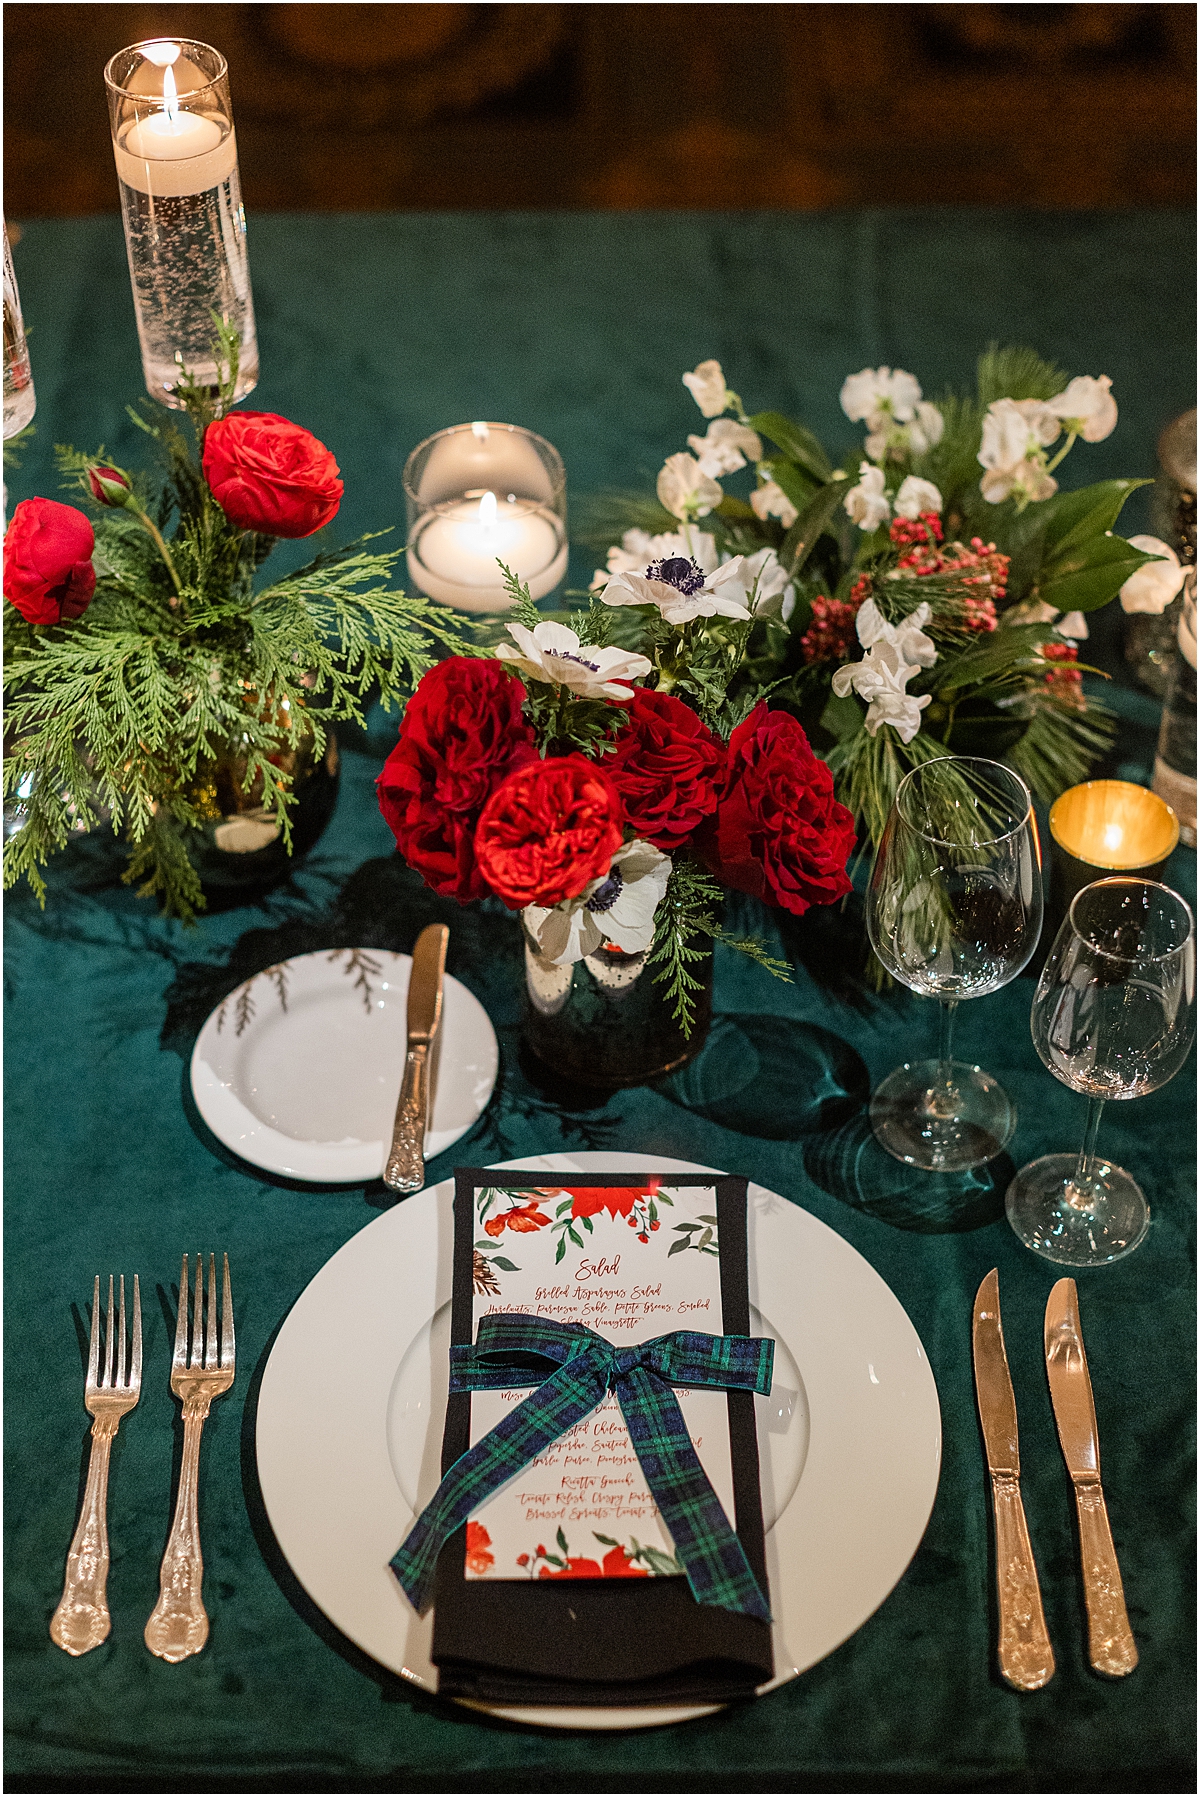 red and white flowers with green plaid details at table place setting 